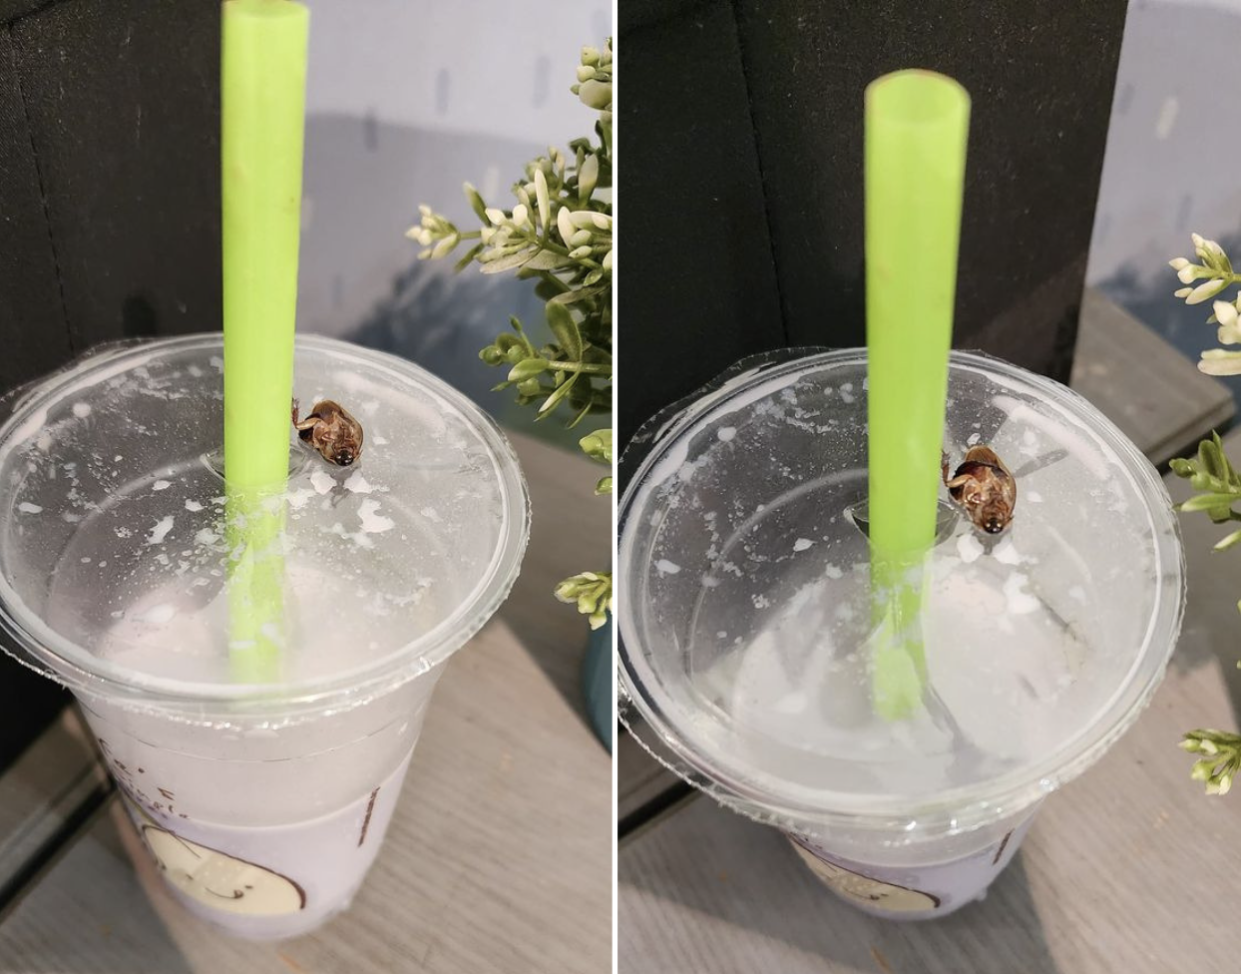 Photo of cockroach found in Mr Bean soy milk drink (Photos: Facebook/Pamster Tan) 